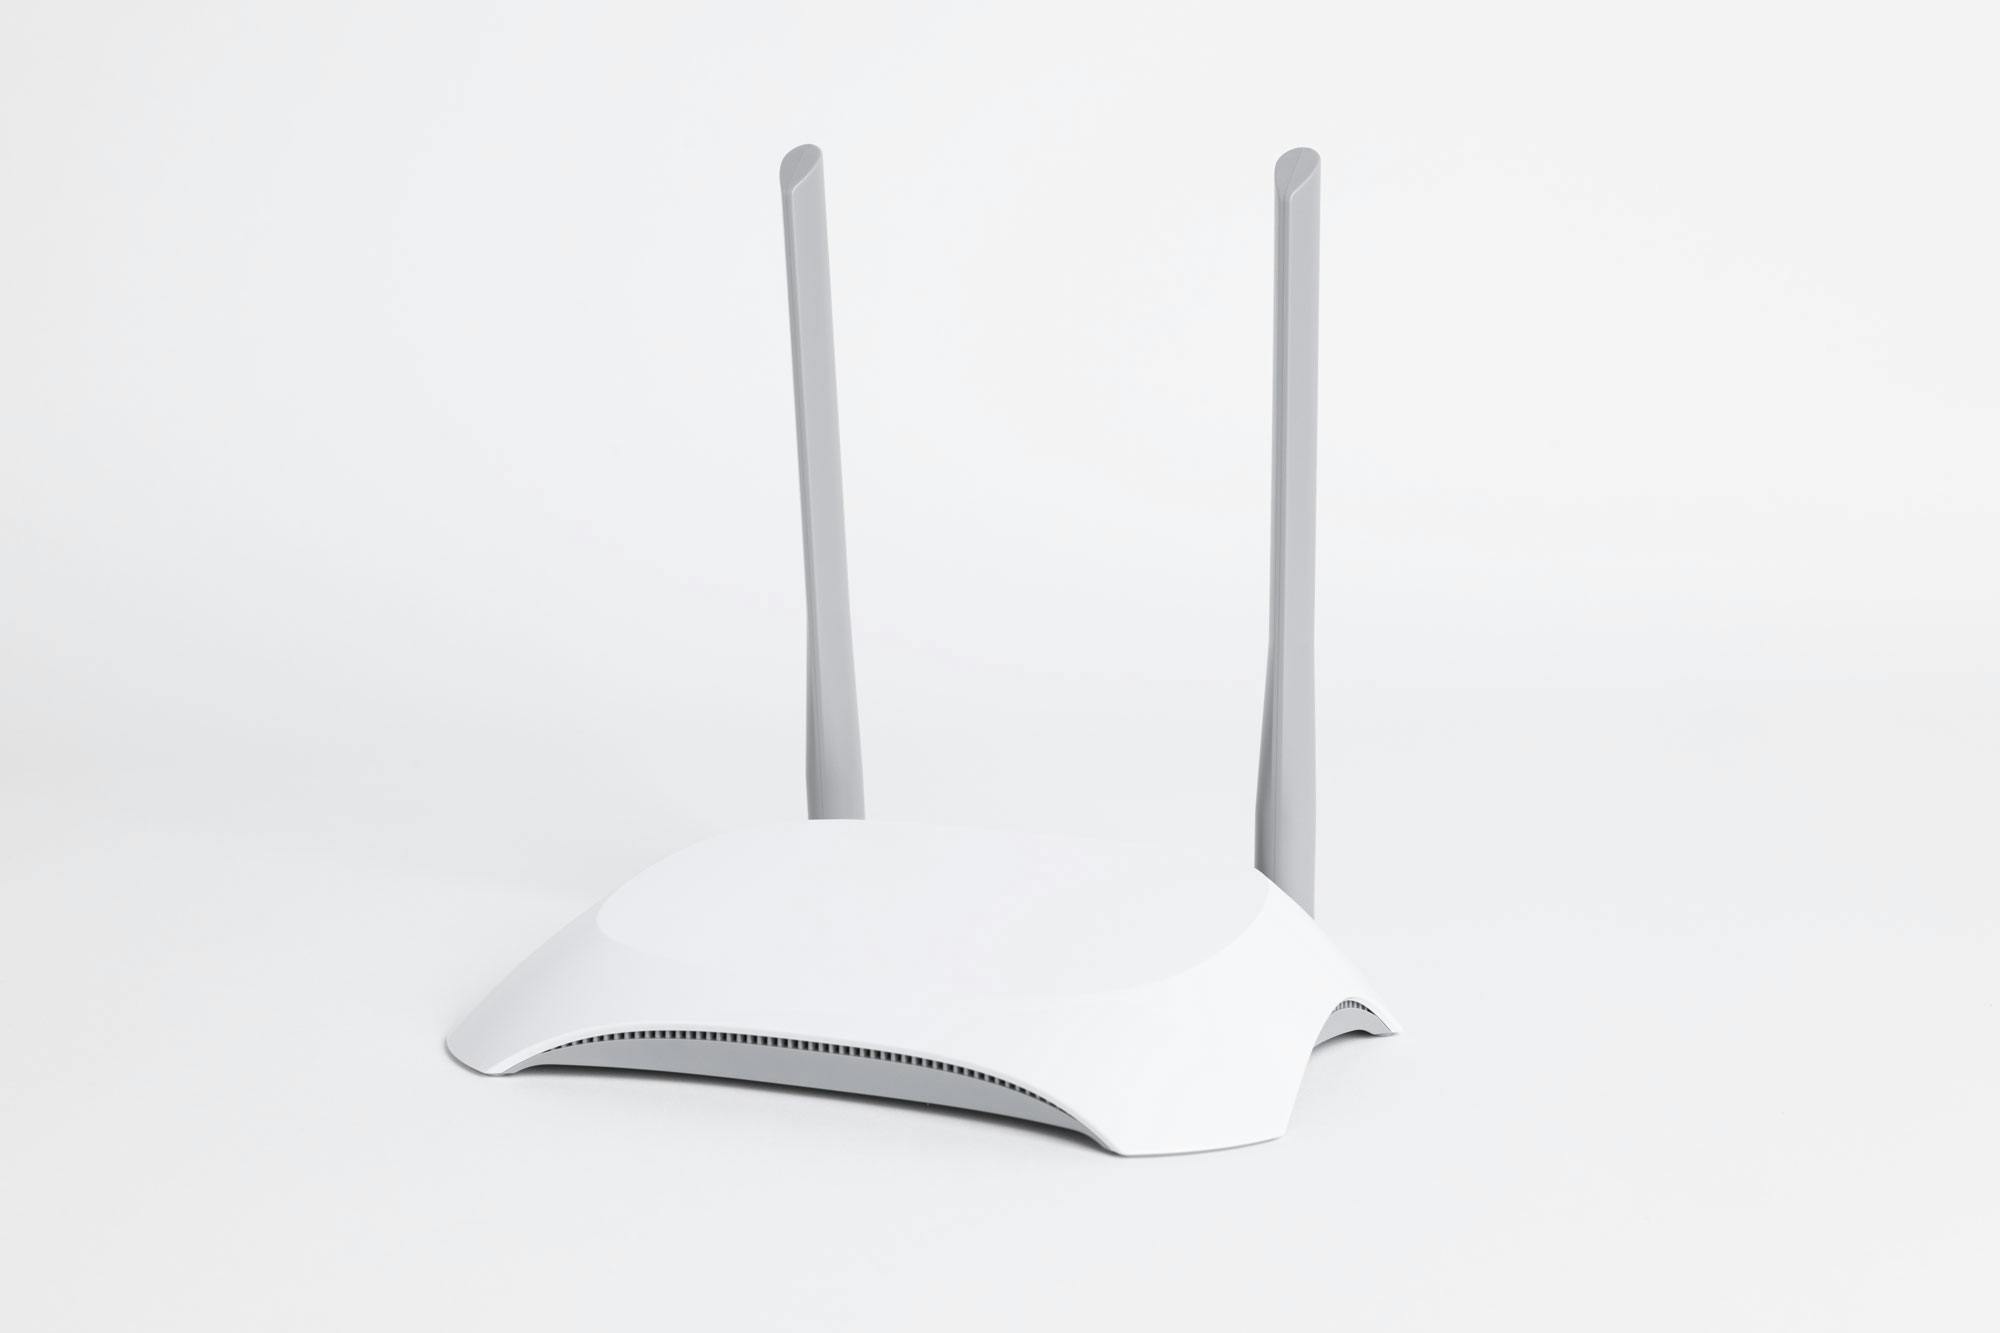 Wireless Access Points - What They Do & How They Work